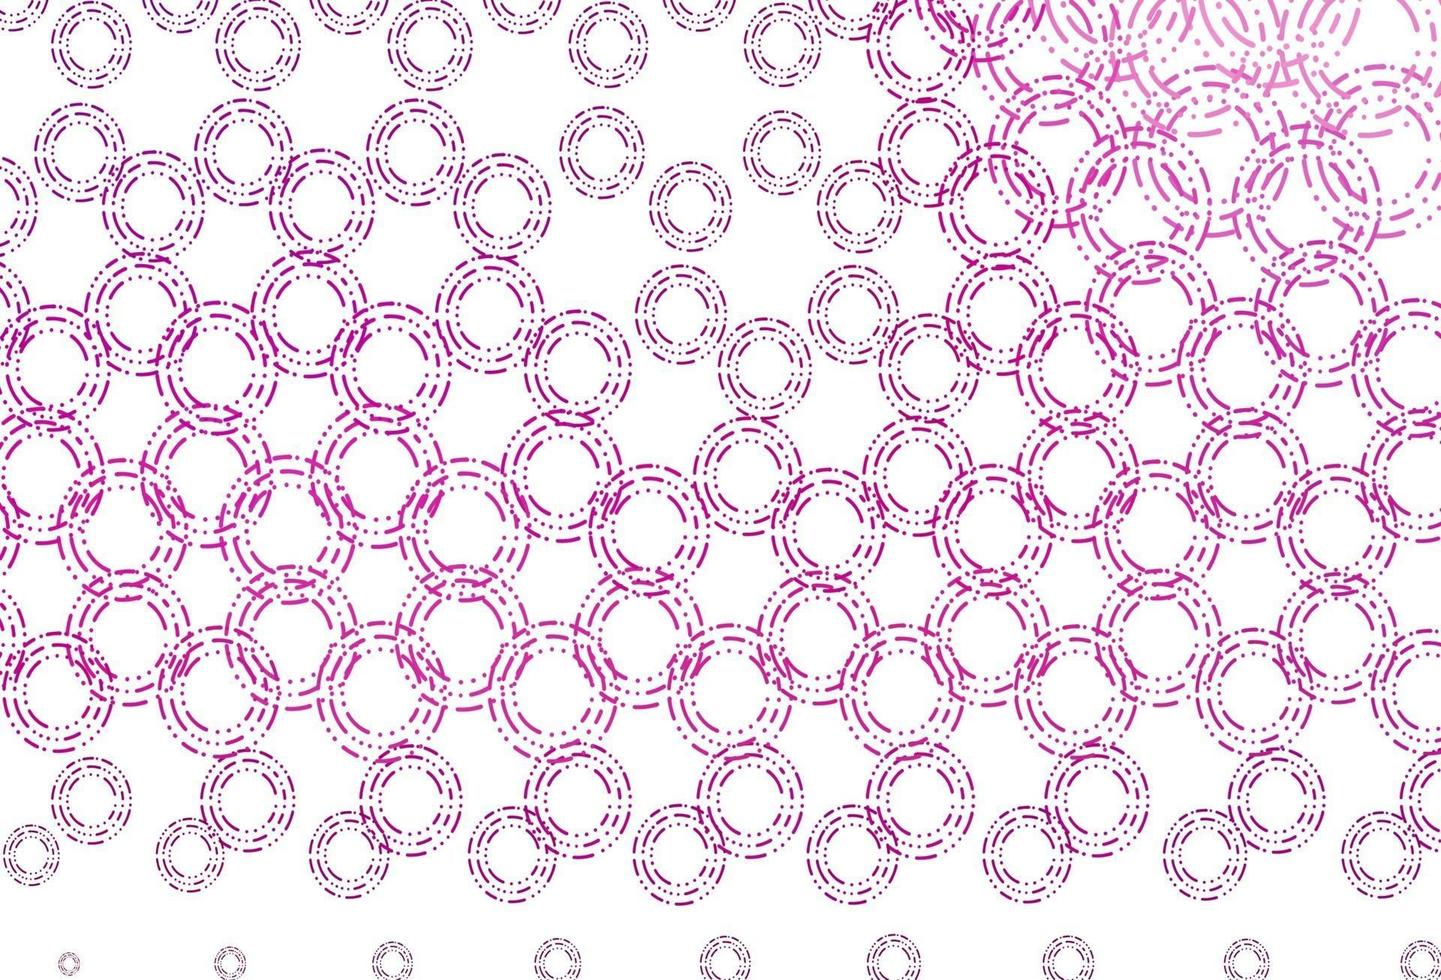 Light purple vector template with circles.